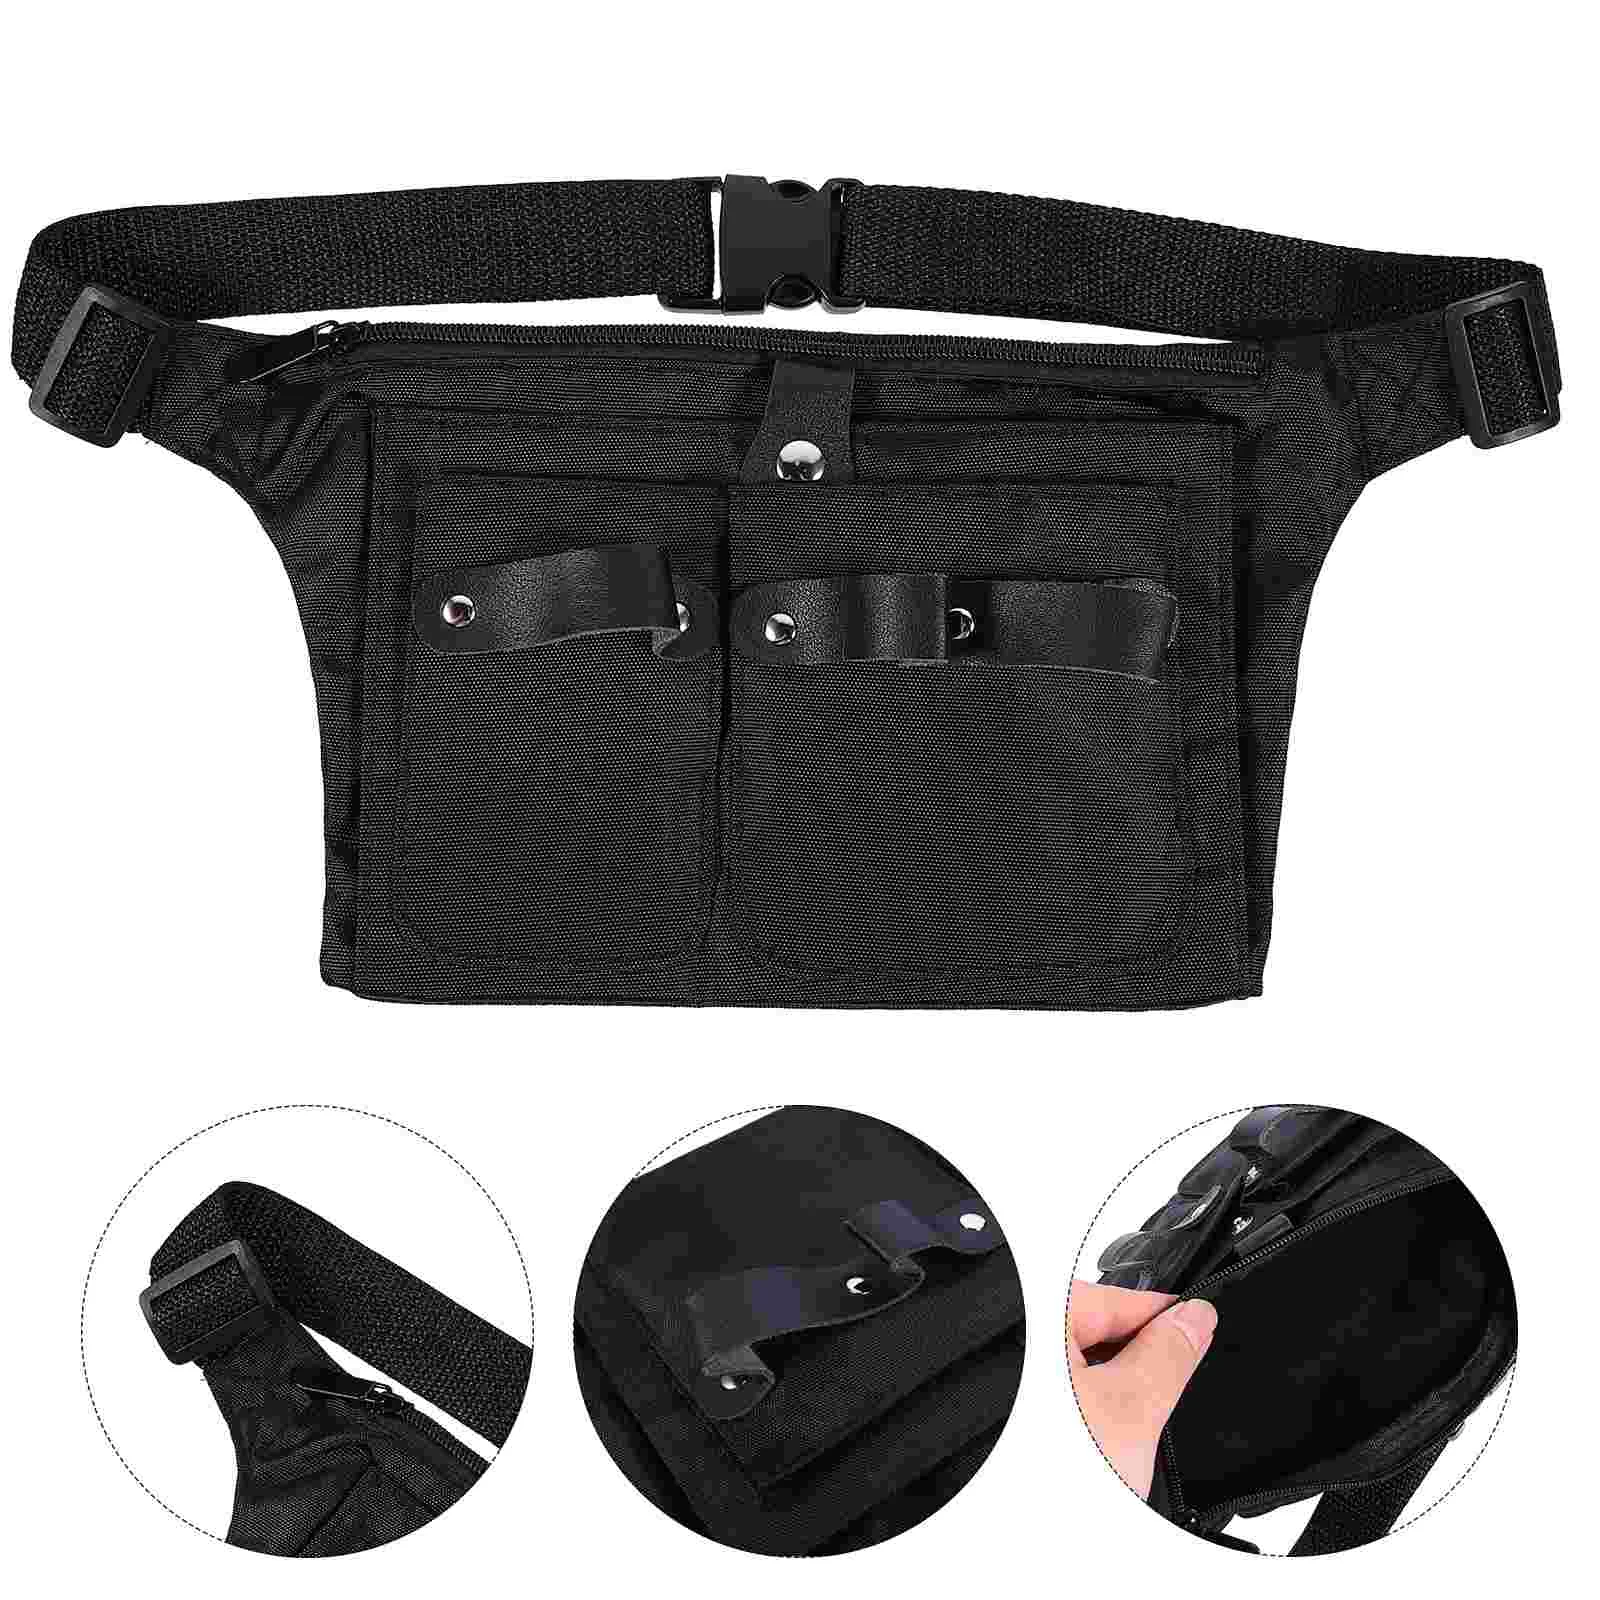 Haircut Storage Fanny Pack Tool Belt Pouch Hairdressing Scissors Bag Holder mic belt microphone holder pack carrier adjustable pouch fitness instructors microphone holder